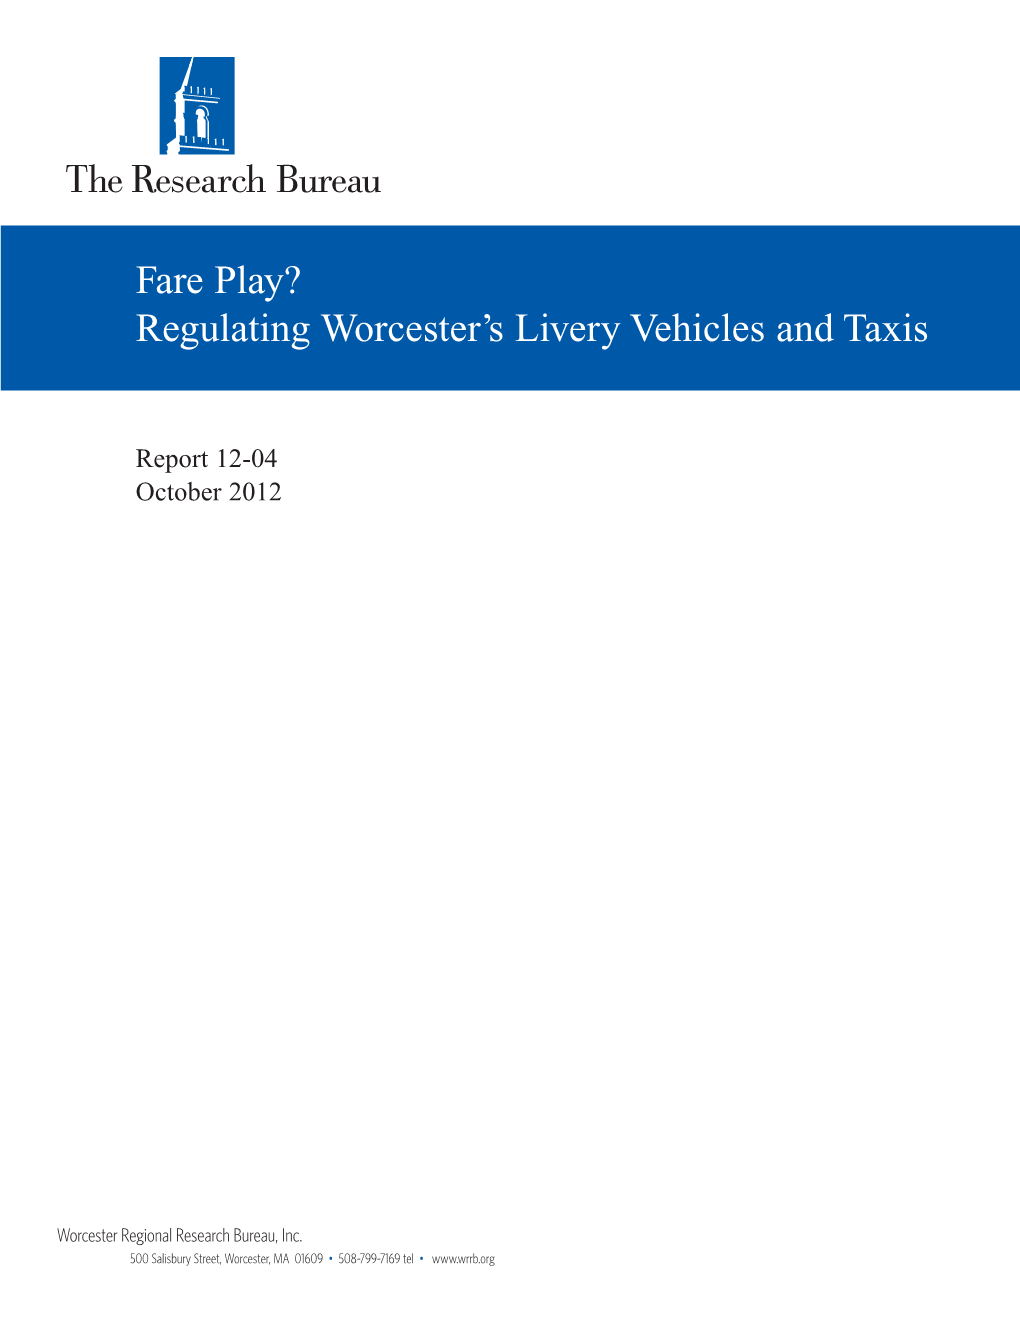 Worcester Regulations Regarding Taxis and Liveries